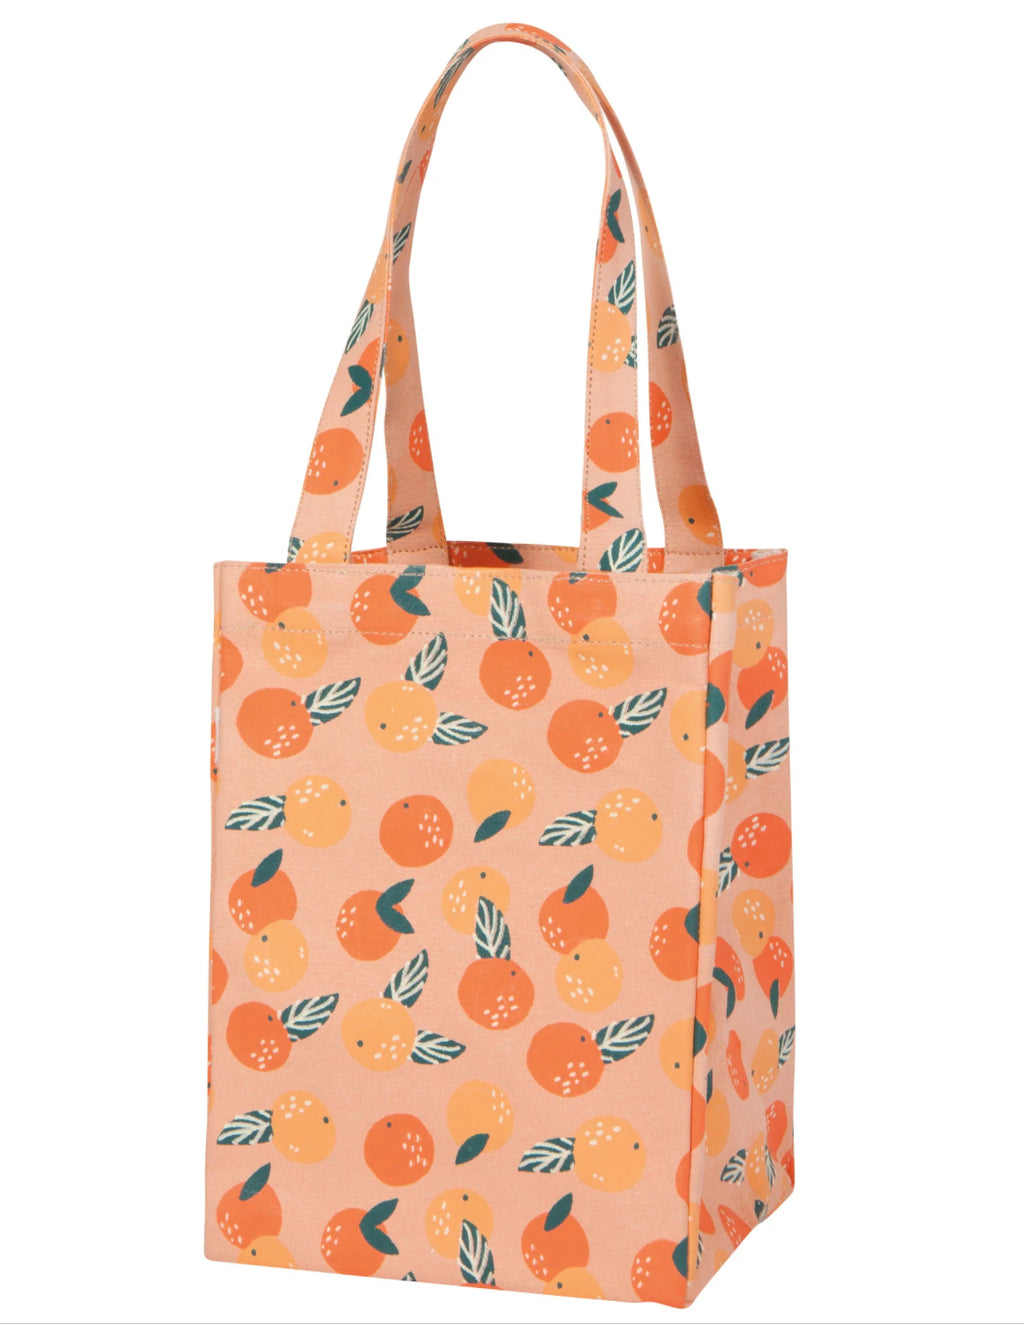 PRINTED LUNCH TOTE ASSORTED